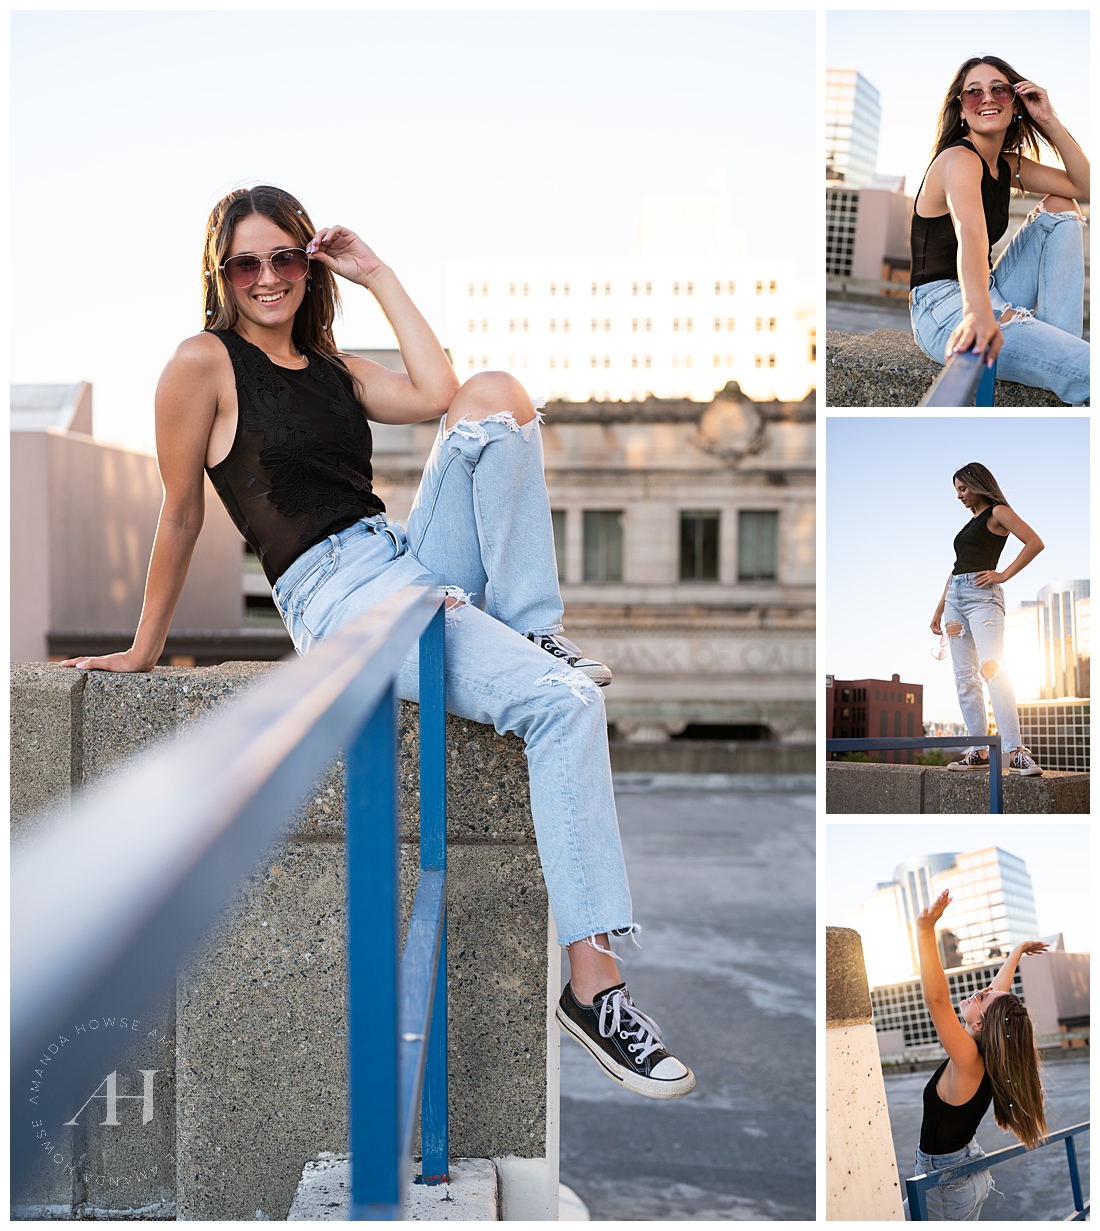 Cool Rooftop Portrait Ideas For Graduates and Friends | Amanda Howse Photography in Downtown Tacoma 